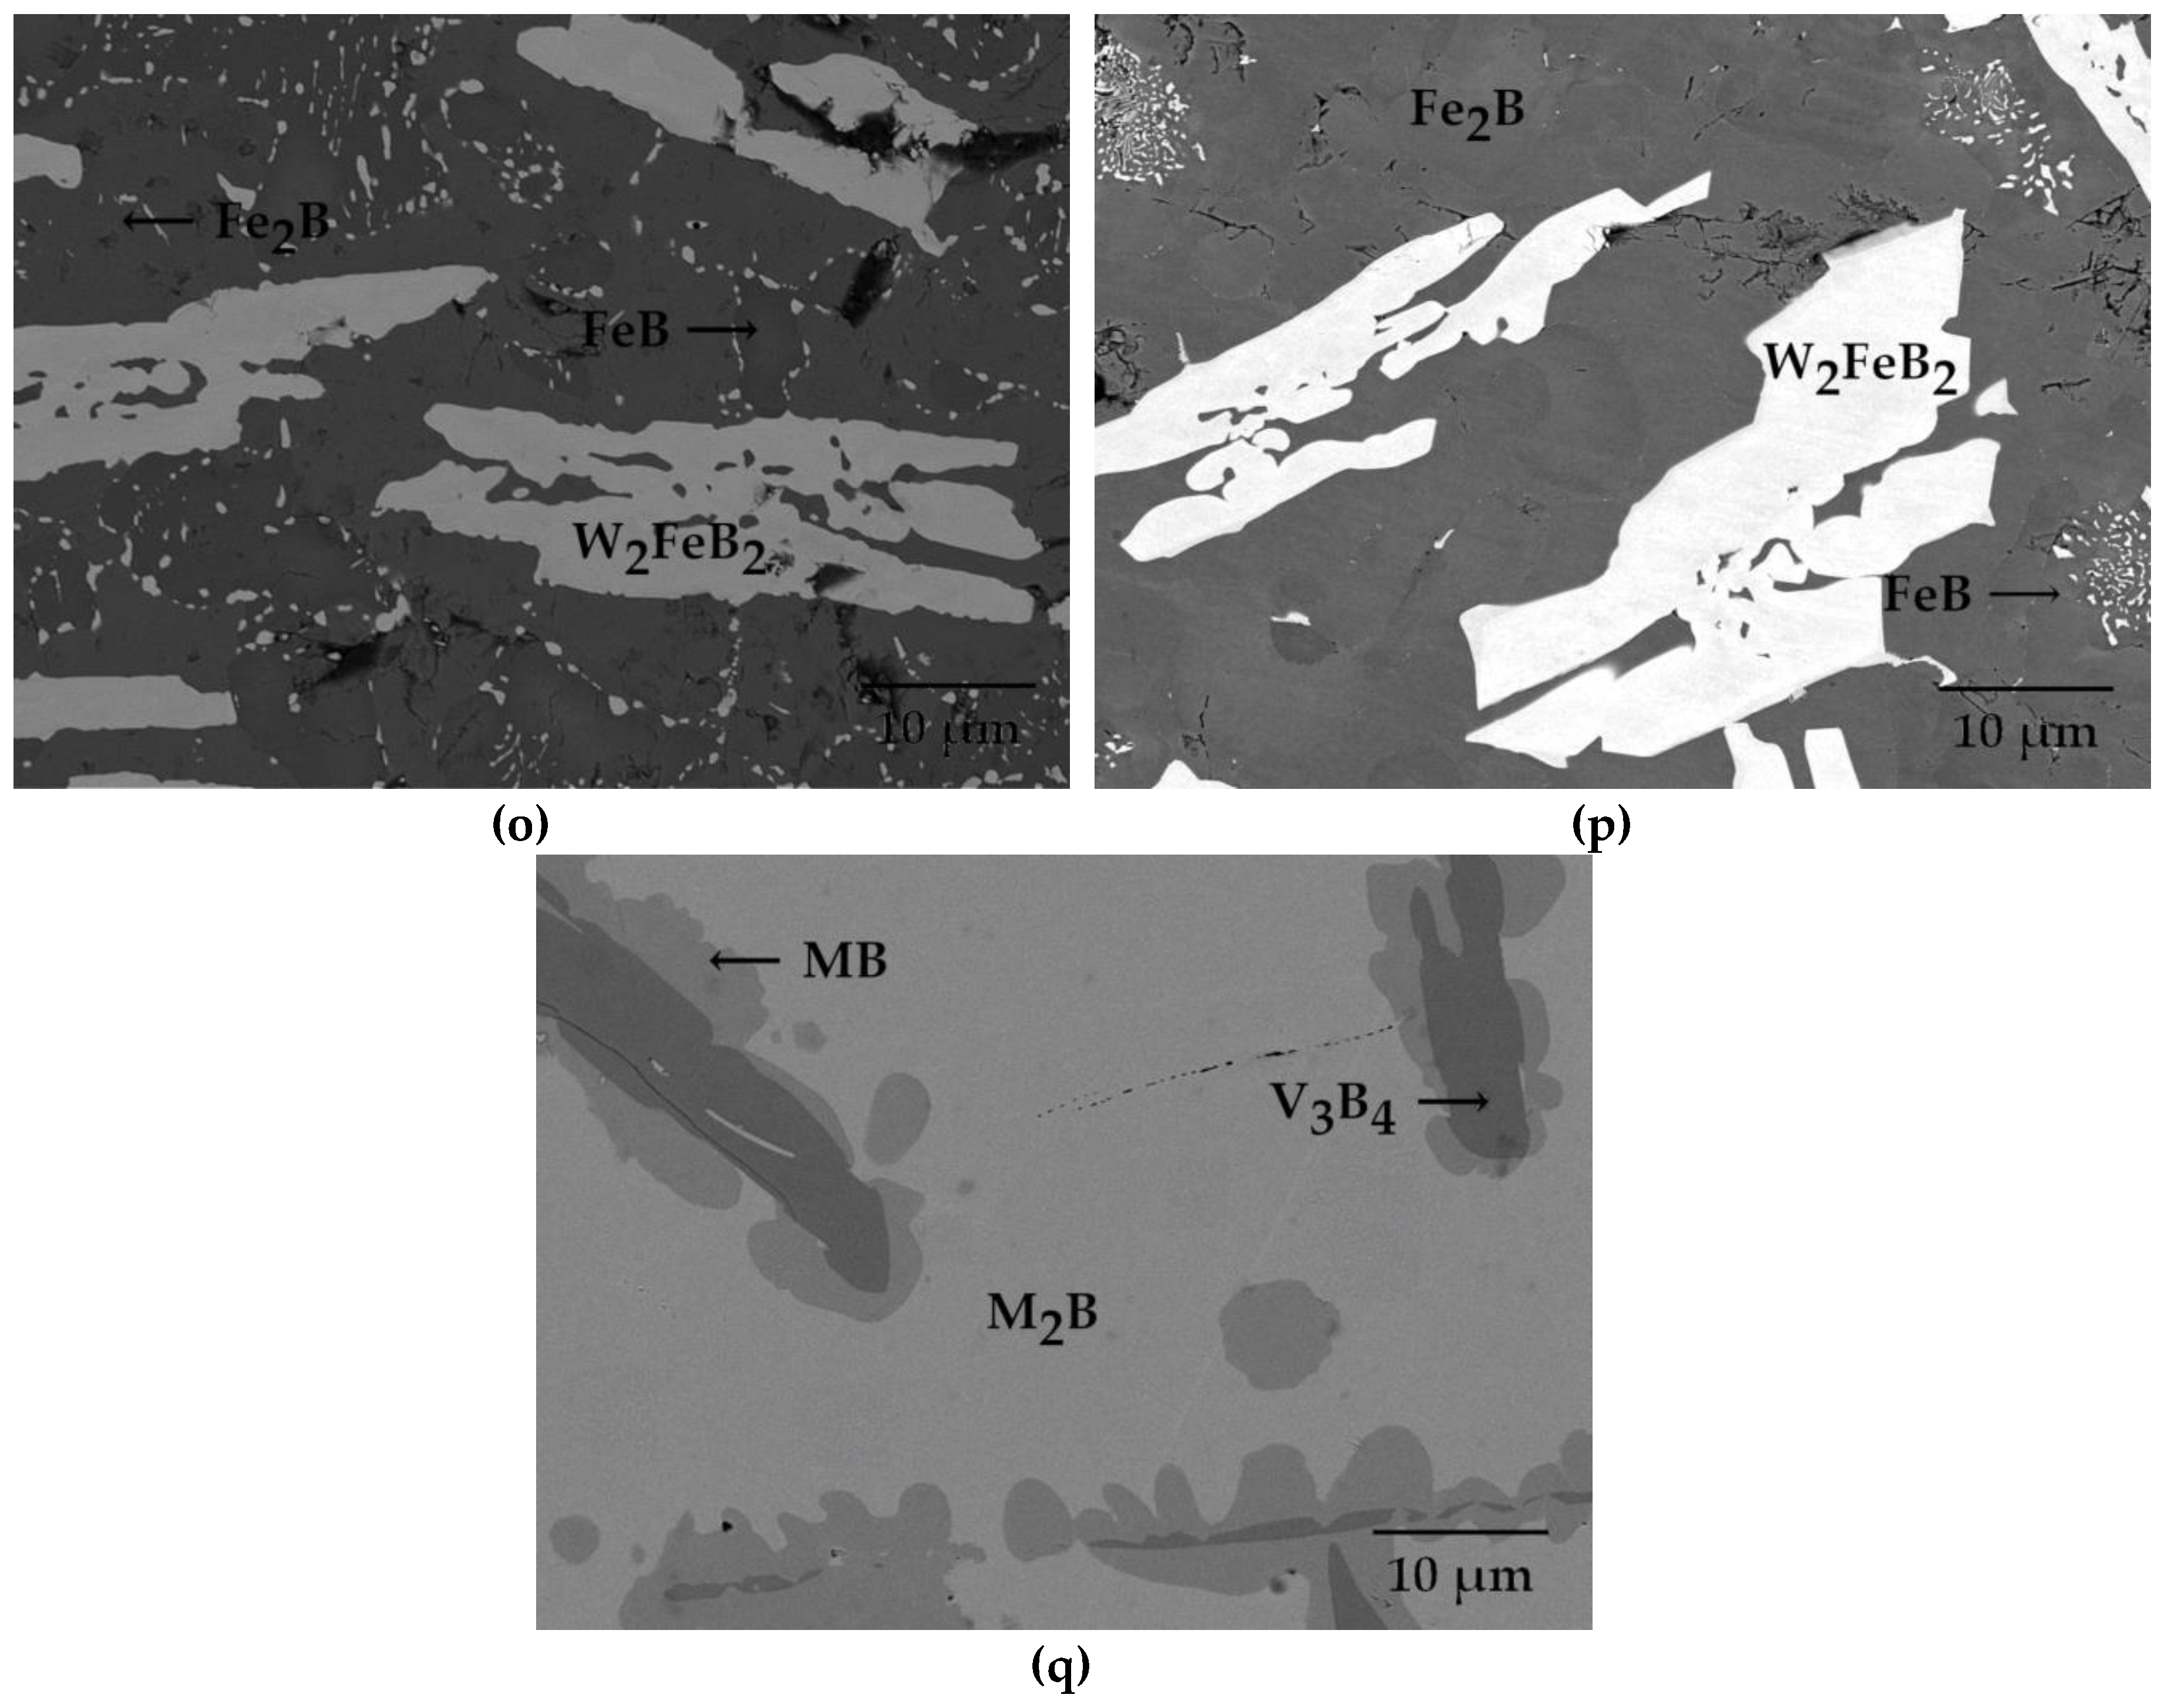 Materials Free Full Text The Influence Of The Third Element On Nano Mechanical Properties Of Iron Borides Feb And Fe2b Formed In Fe B X X C Cr Mn V W Mn